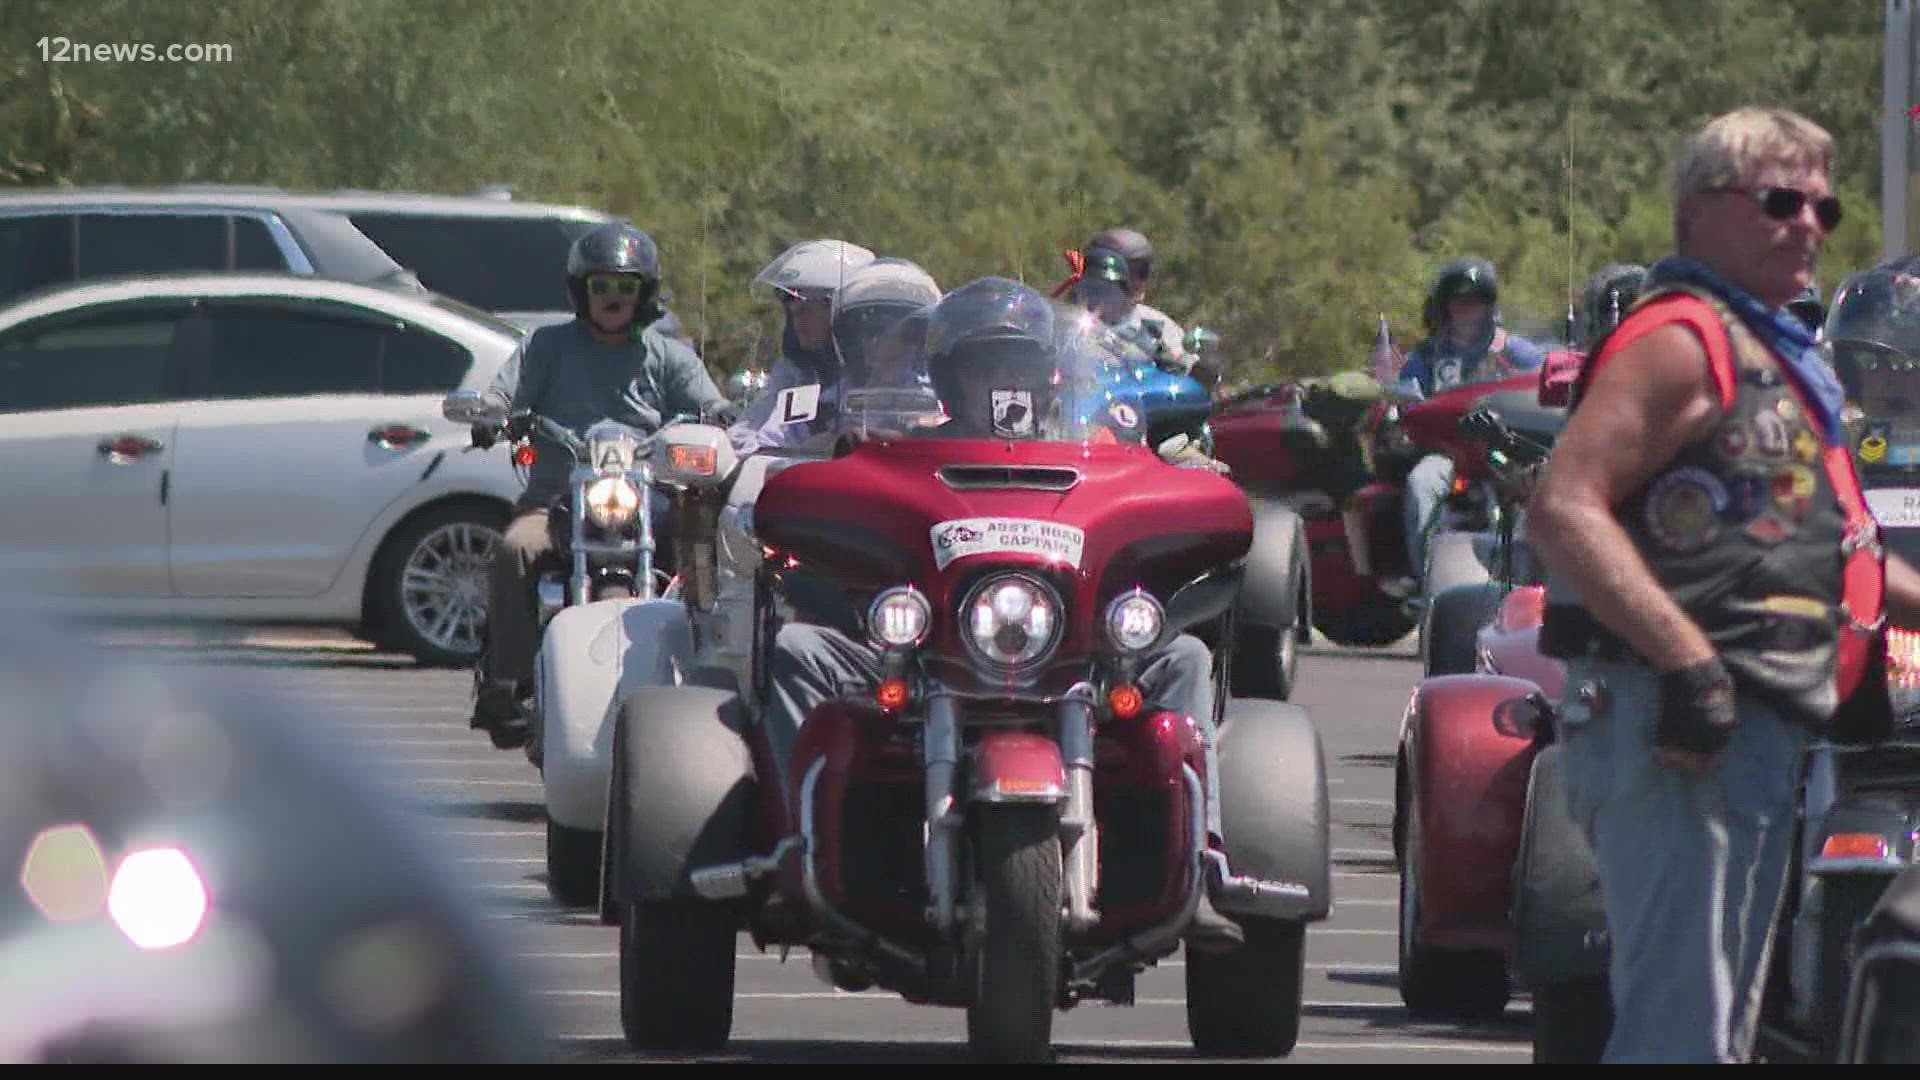 225 motorcycles came rolling into the USS Arizona Memorial Gardens this week. The riders are raising money for children of fallen military personnel.